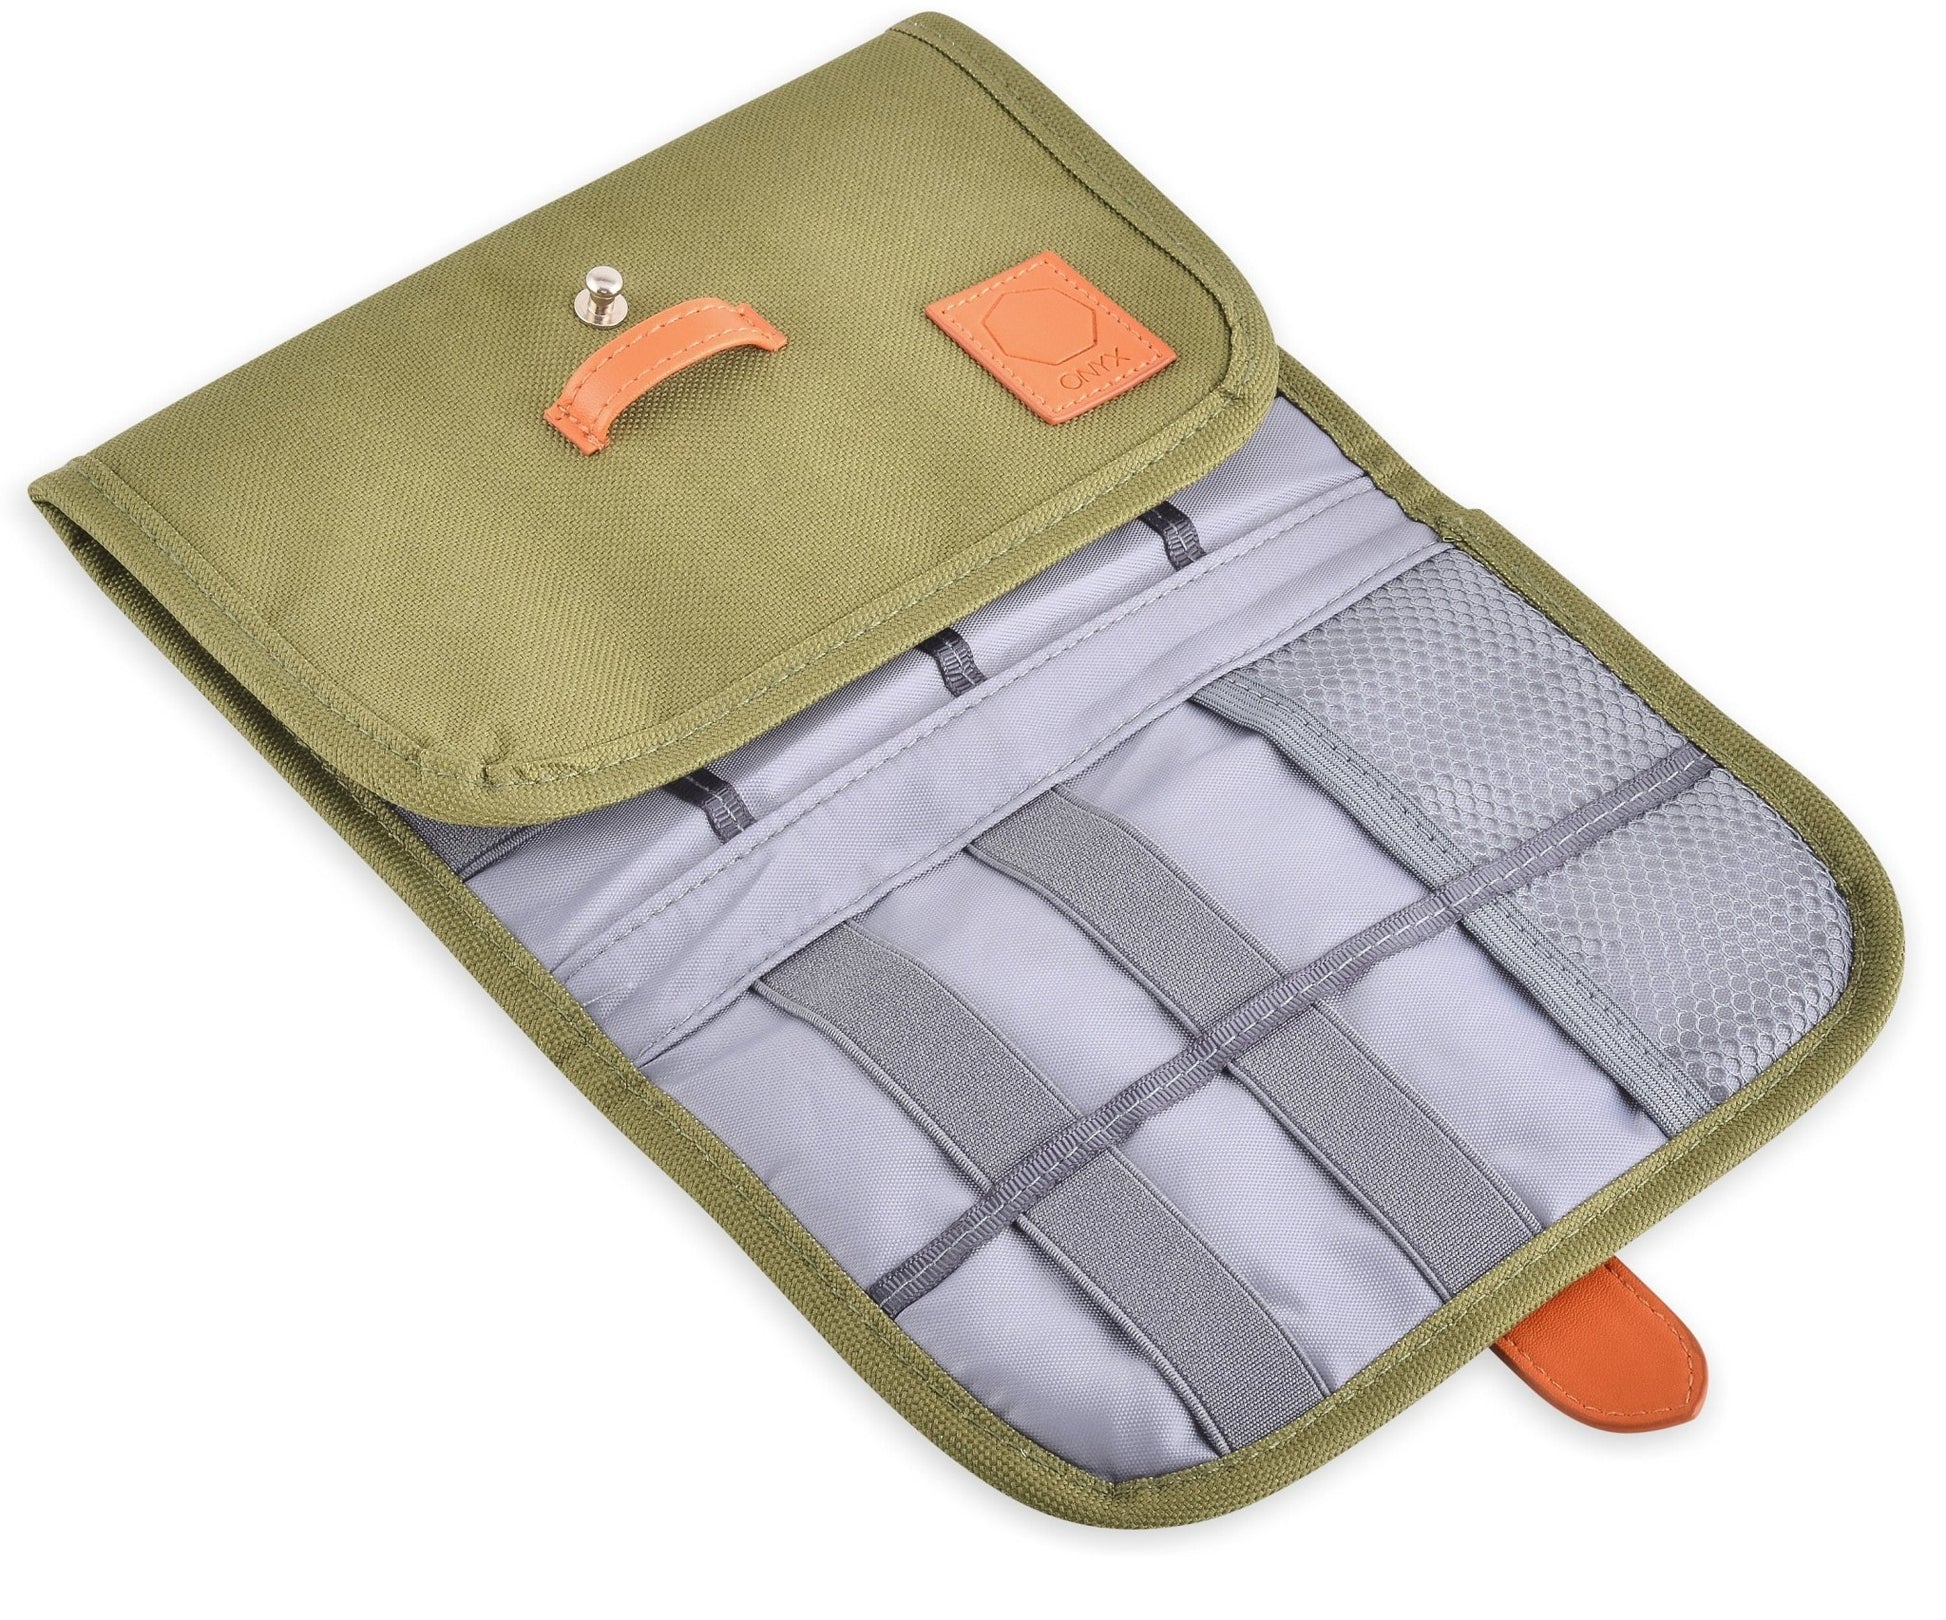 Olive Electronics Organizer Bag – Portable Travel Accessories Case for Chargers, Cords, Cables, Batteries and More!